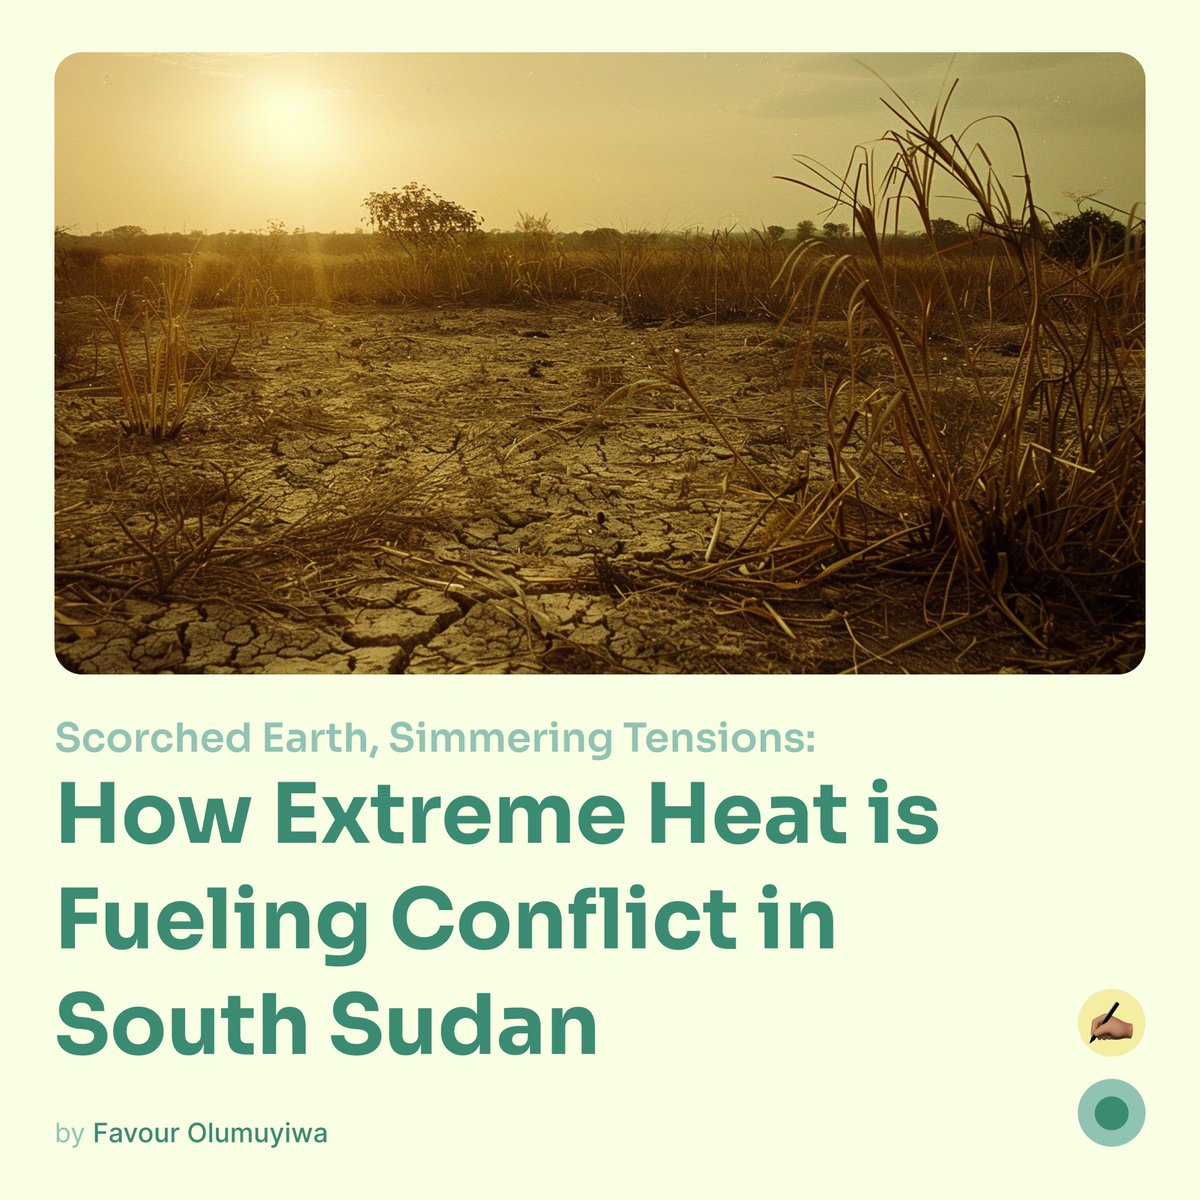 In the scorching reality of South Sudan, where #climatechange collides with socio-political strife, the quest for survival intertwines with the urgent need for holistic solutions to mitigate environmental degradation and foster peace. .